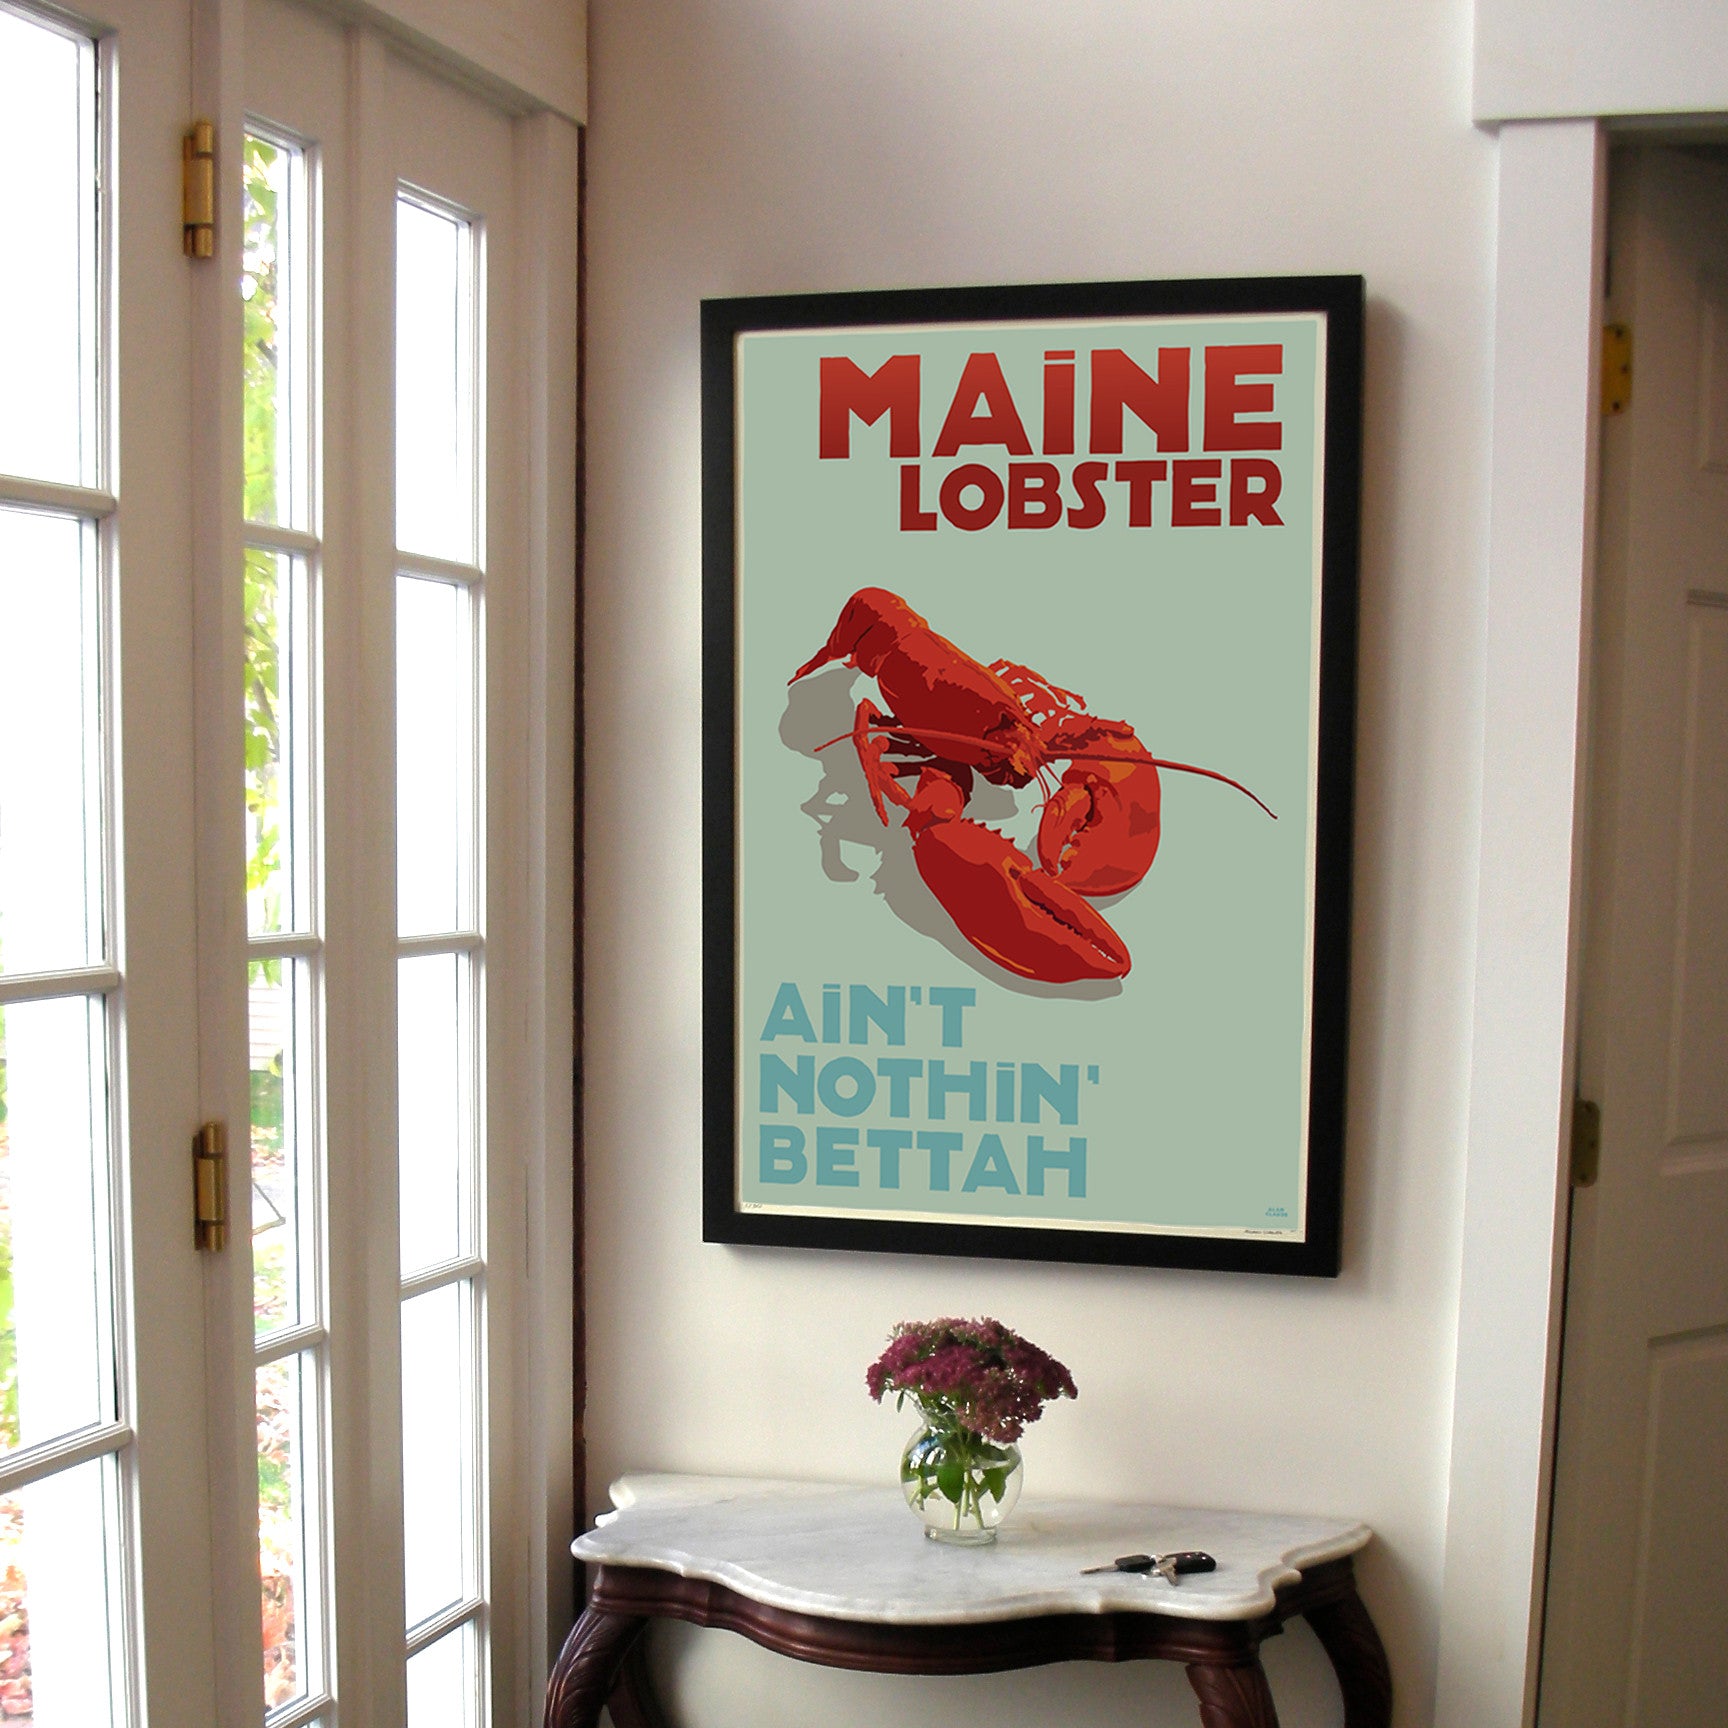 Maine Lobster Art Print 24" x 36" Framed Travel Poster By Alan Claude  - Maine